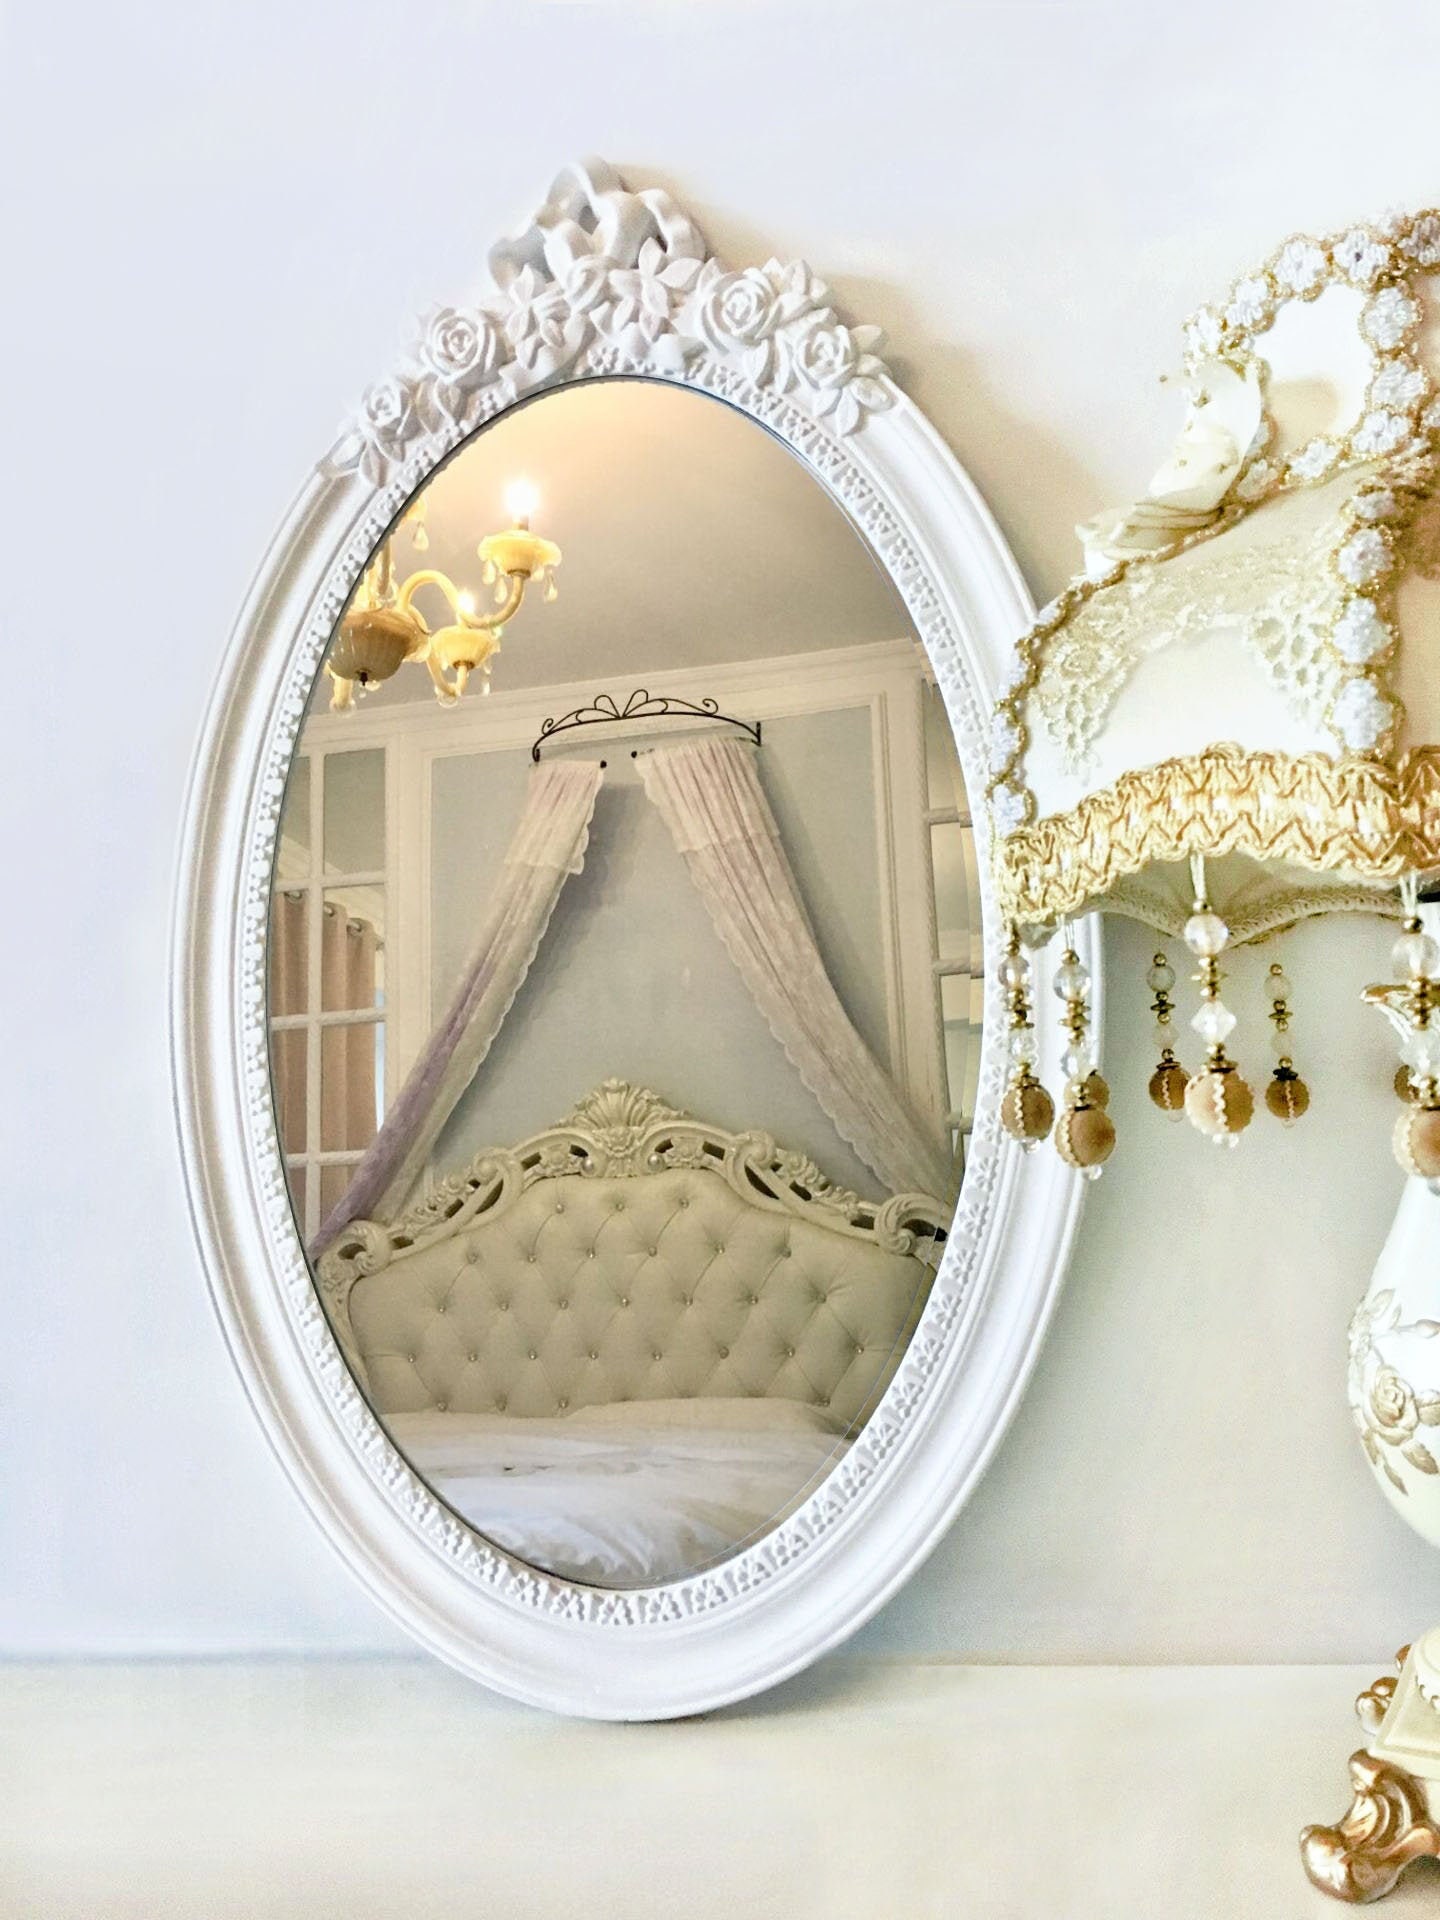 Antique White Taper and Flare Mirror  Hanging wall mirror, Decorating mirror  frames, Transitional mirrors